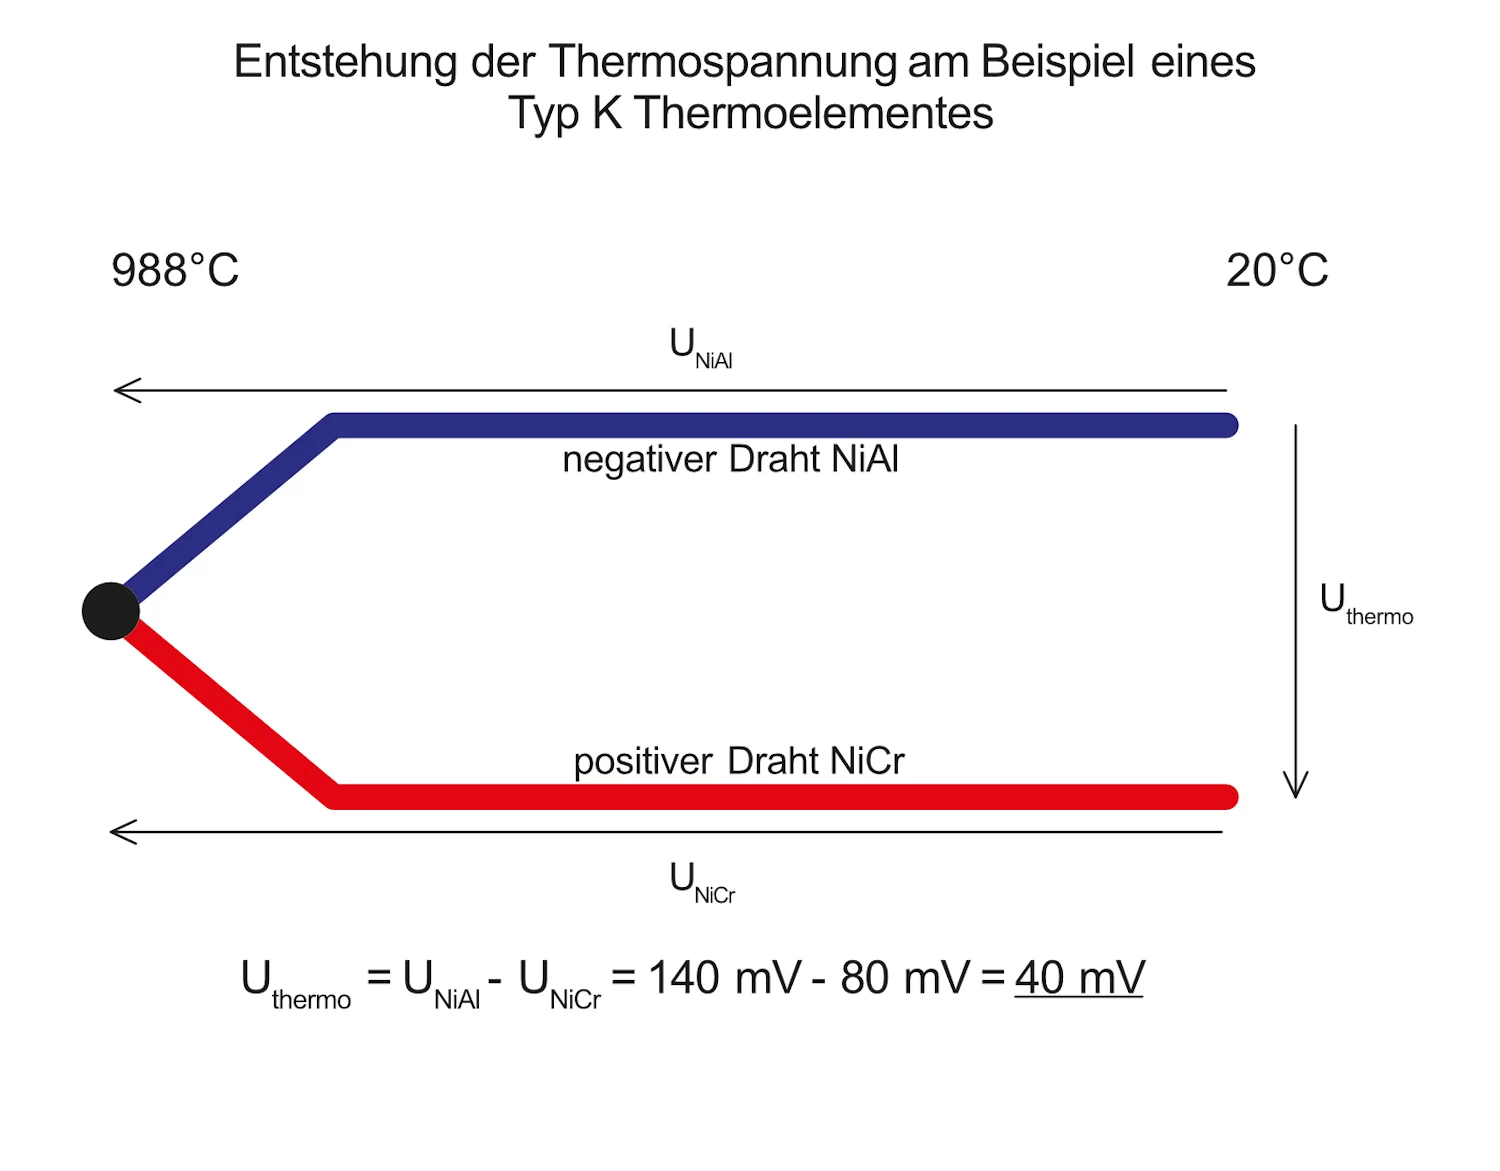 The thermoelectric voltage is the difference between two different thermoelectric voltages